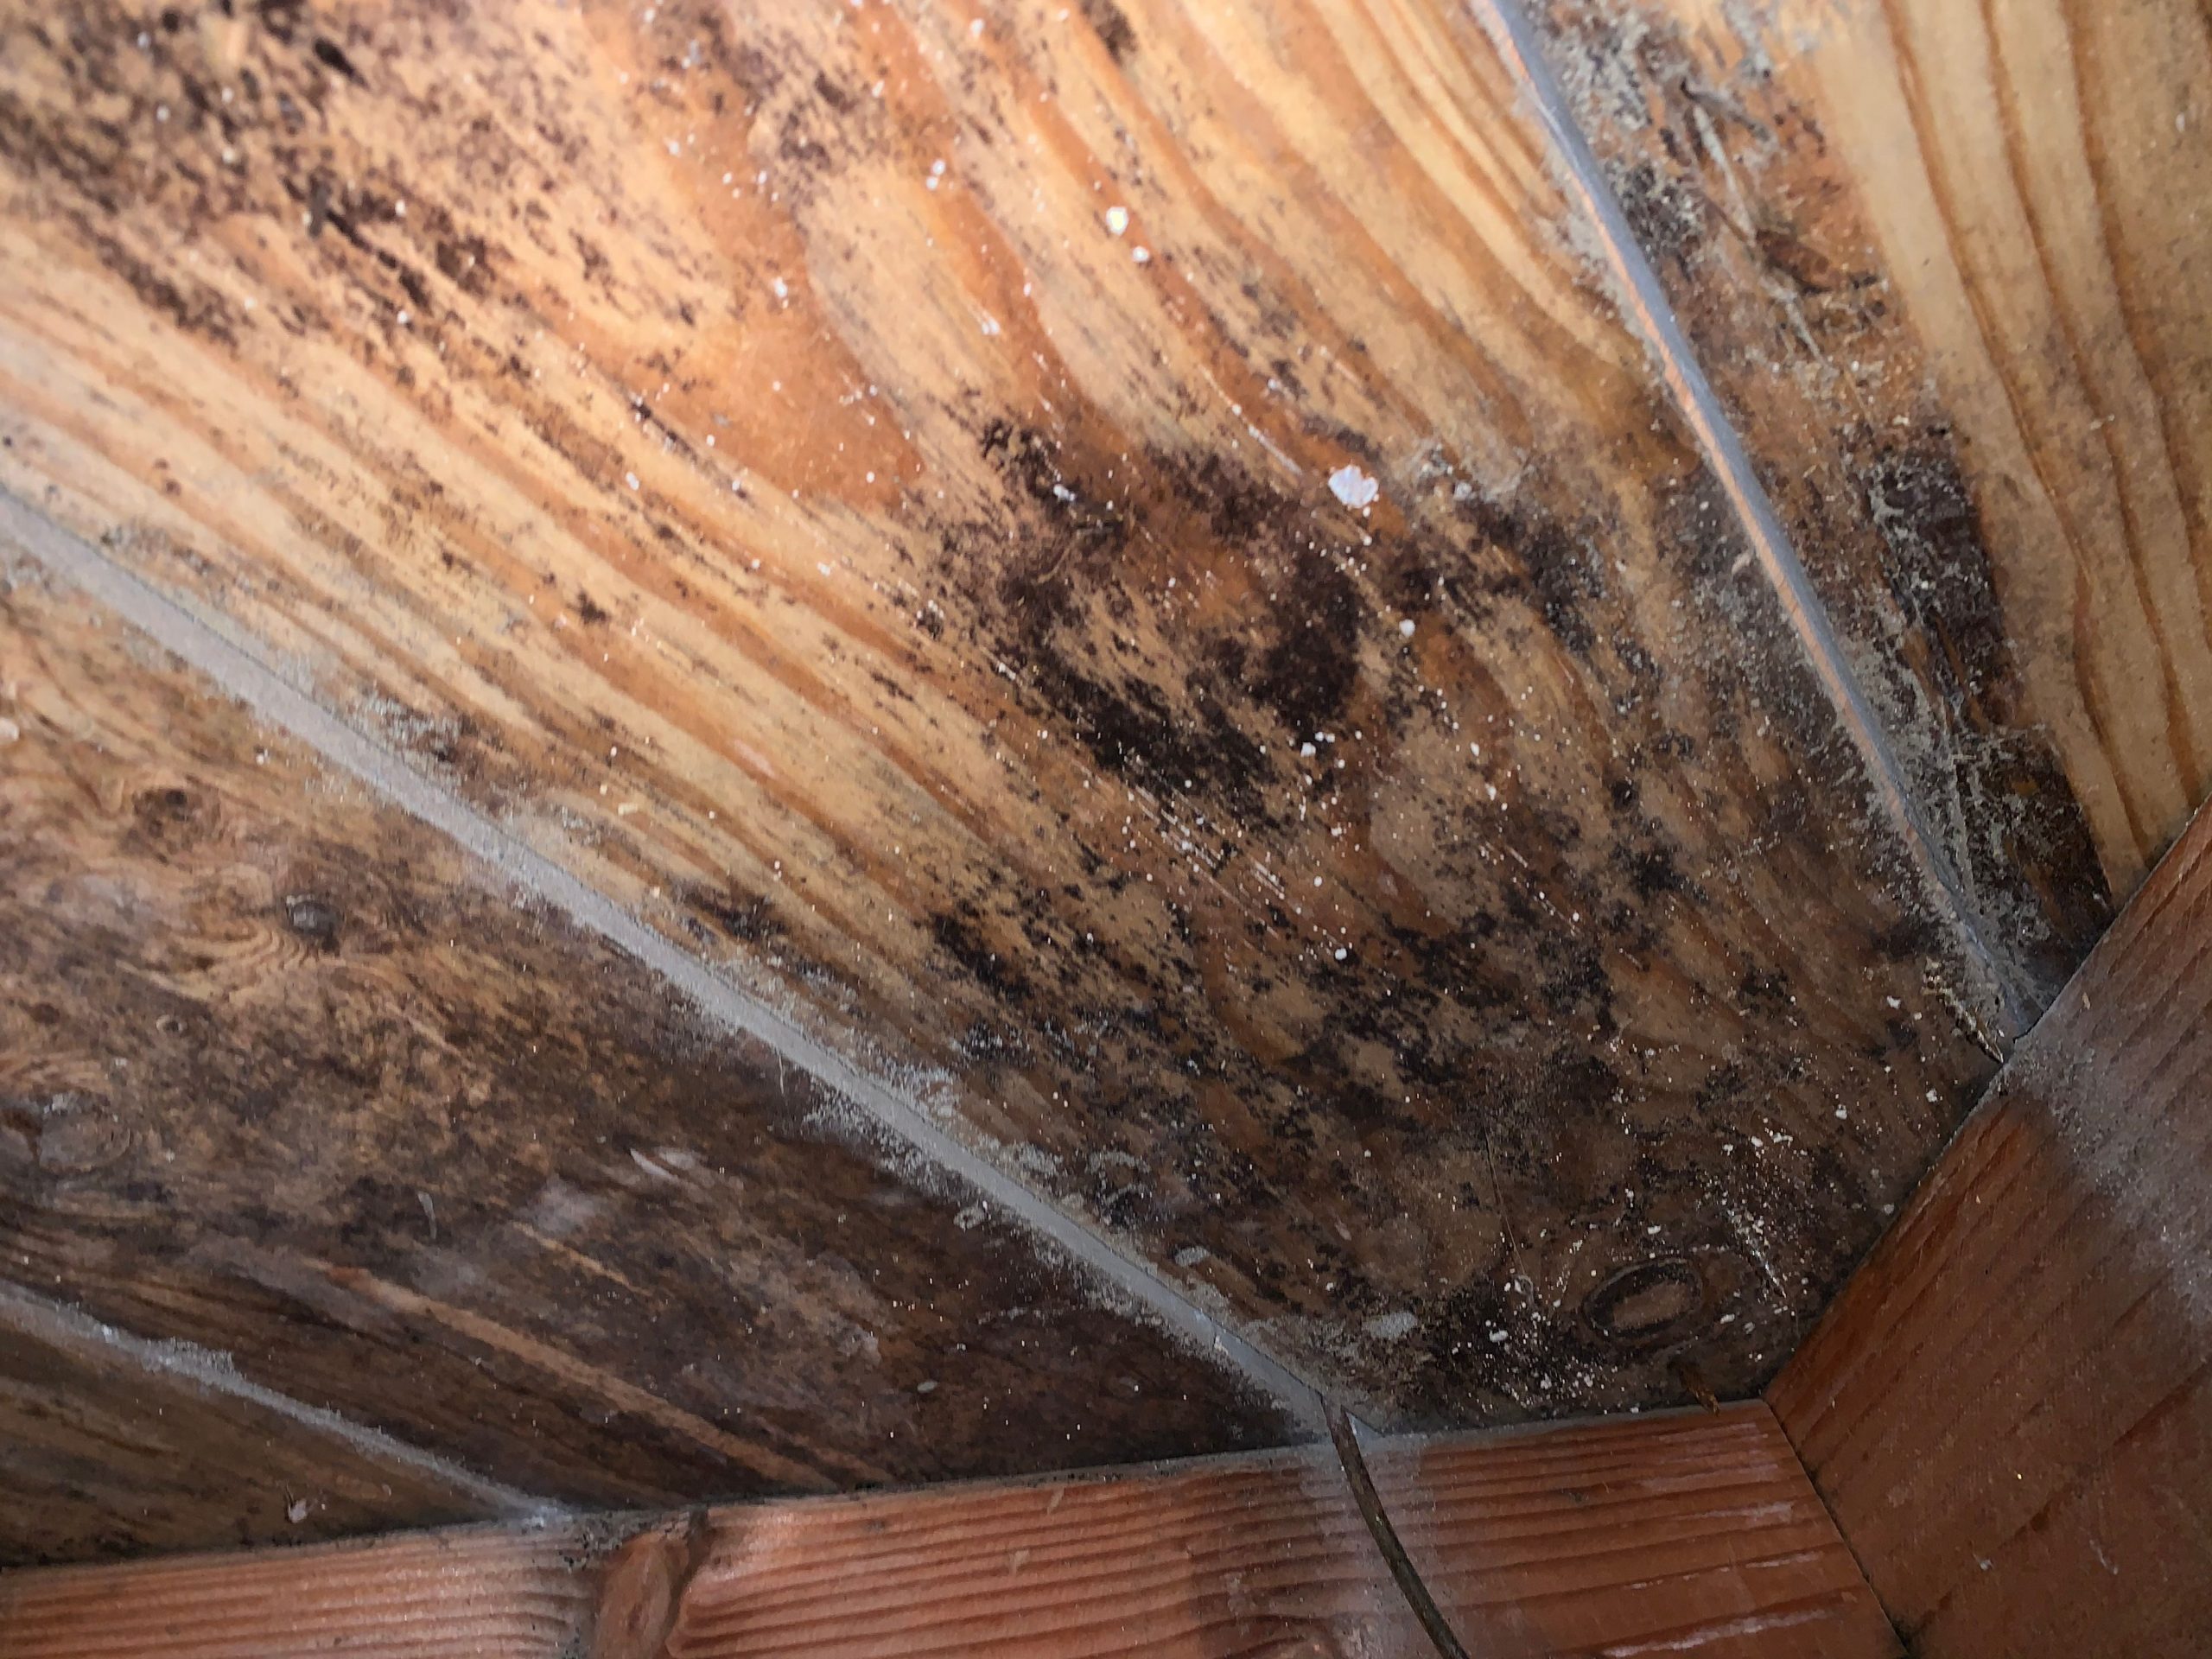 How To Remove Mold From Wood Subfloor